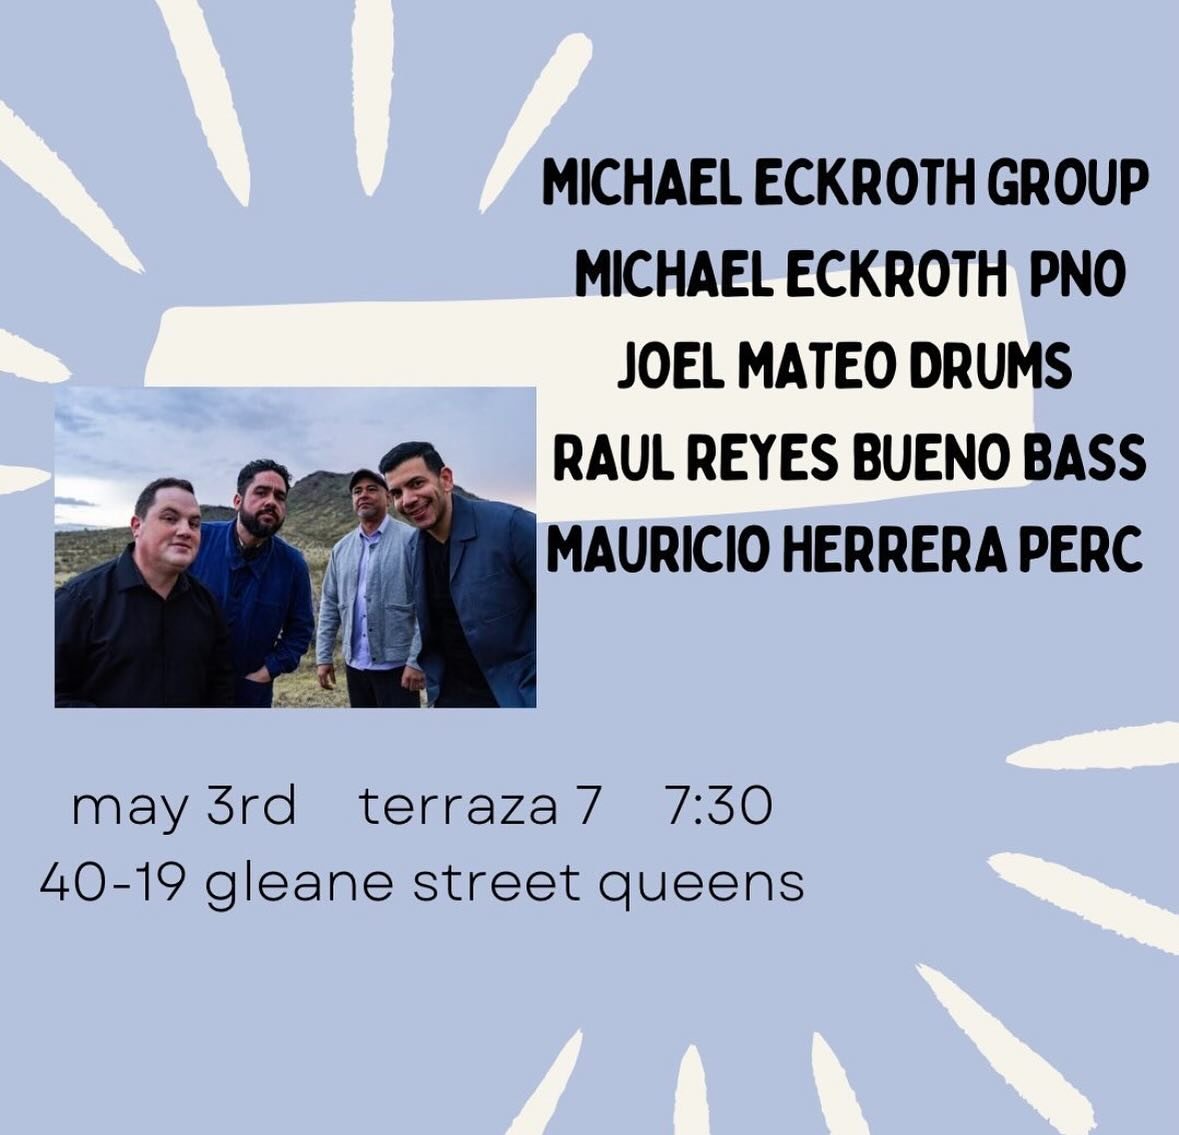 May 3rd at @terraza_7 in NYC @michaeleckroth #TRRcollective! New album coming soon!